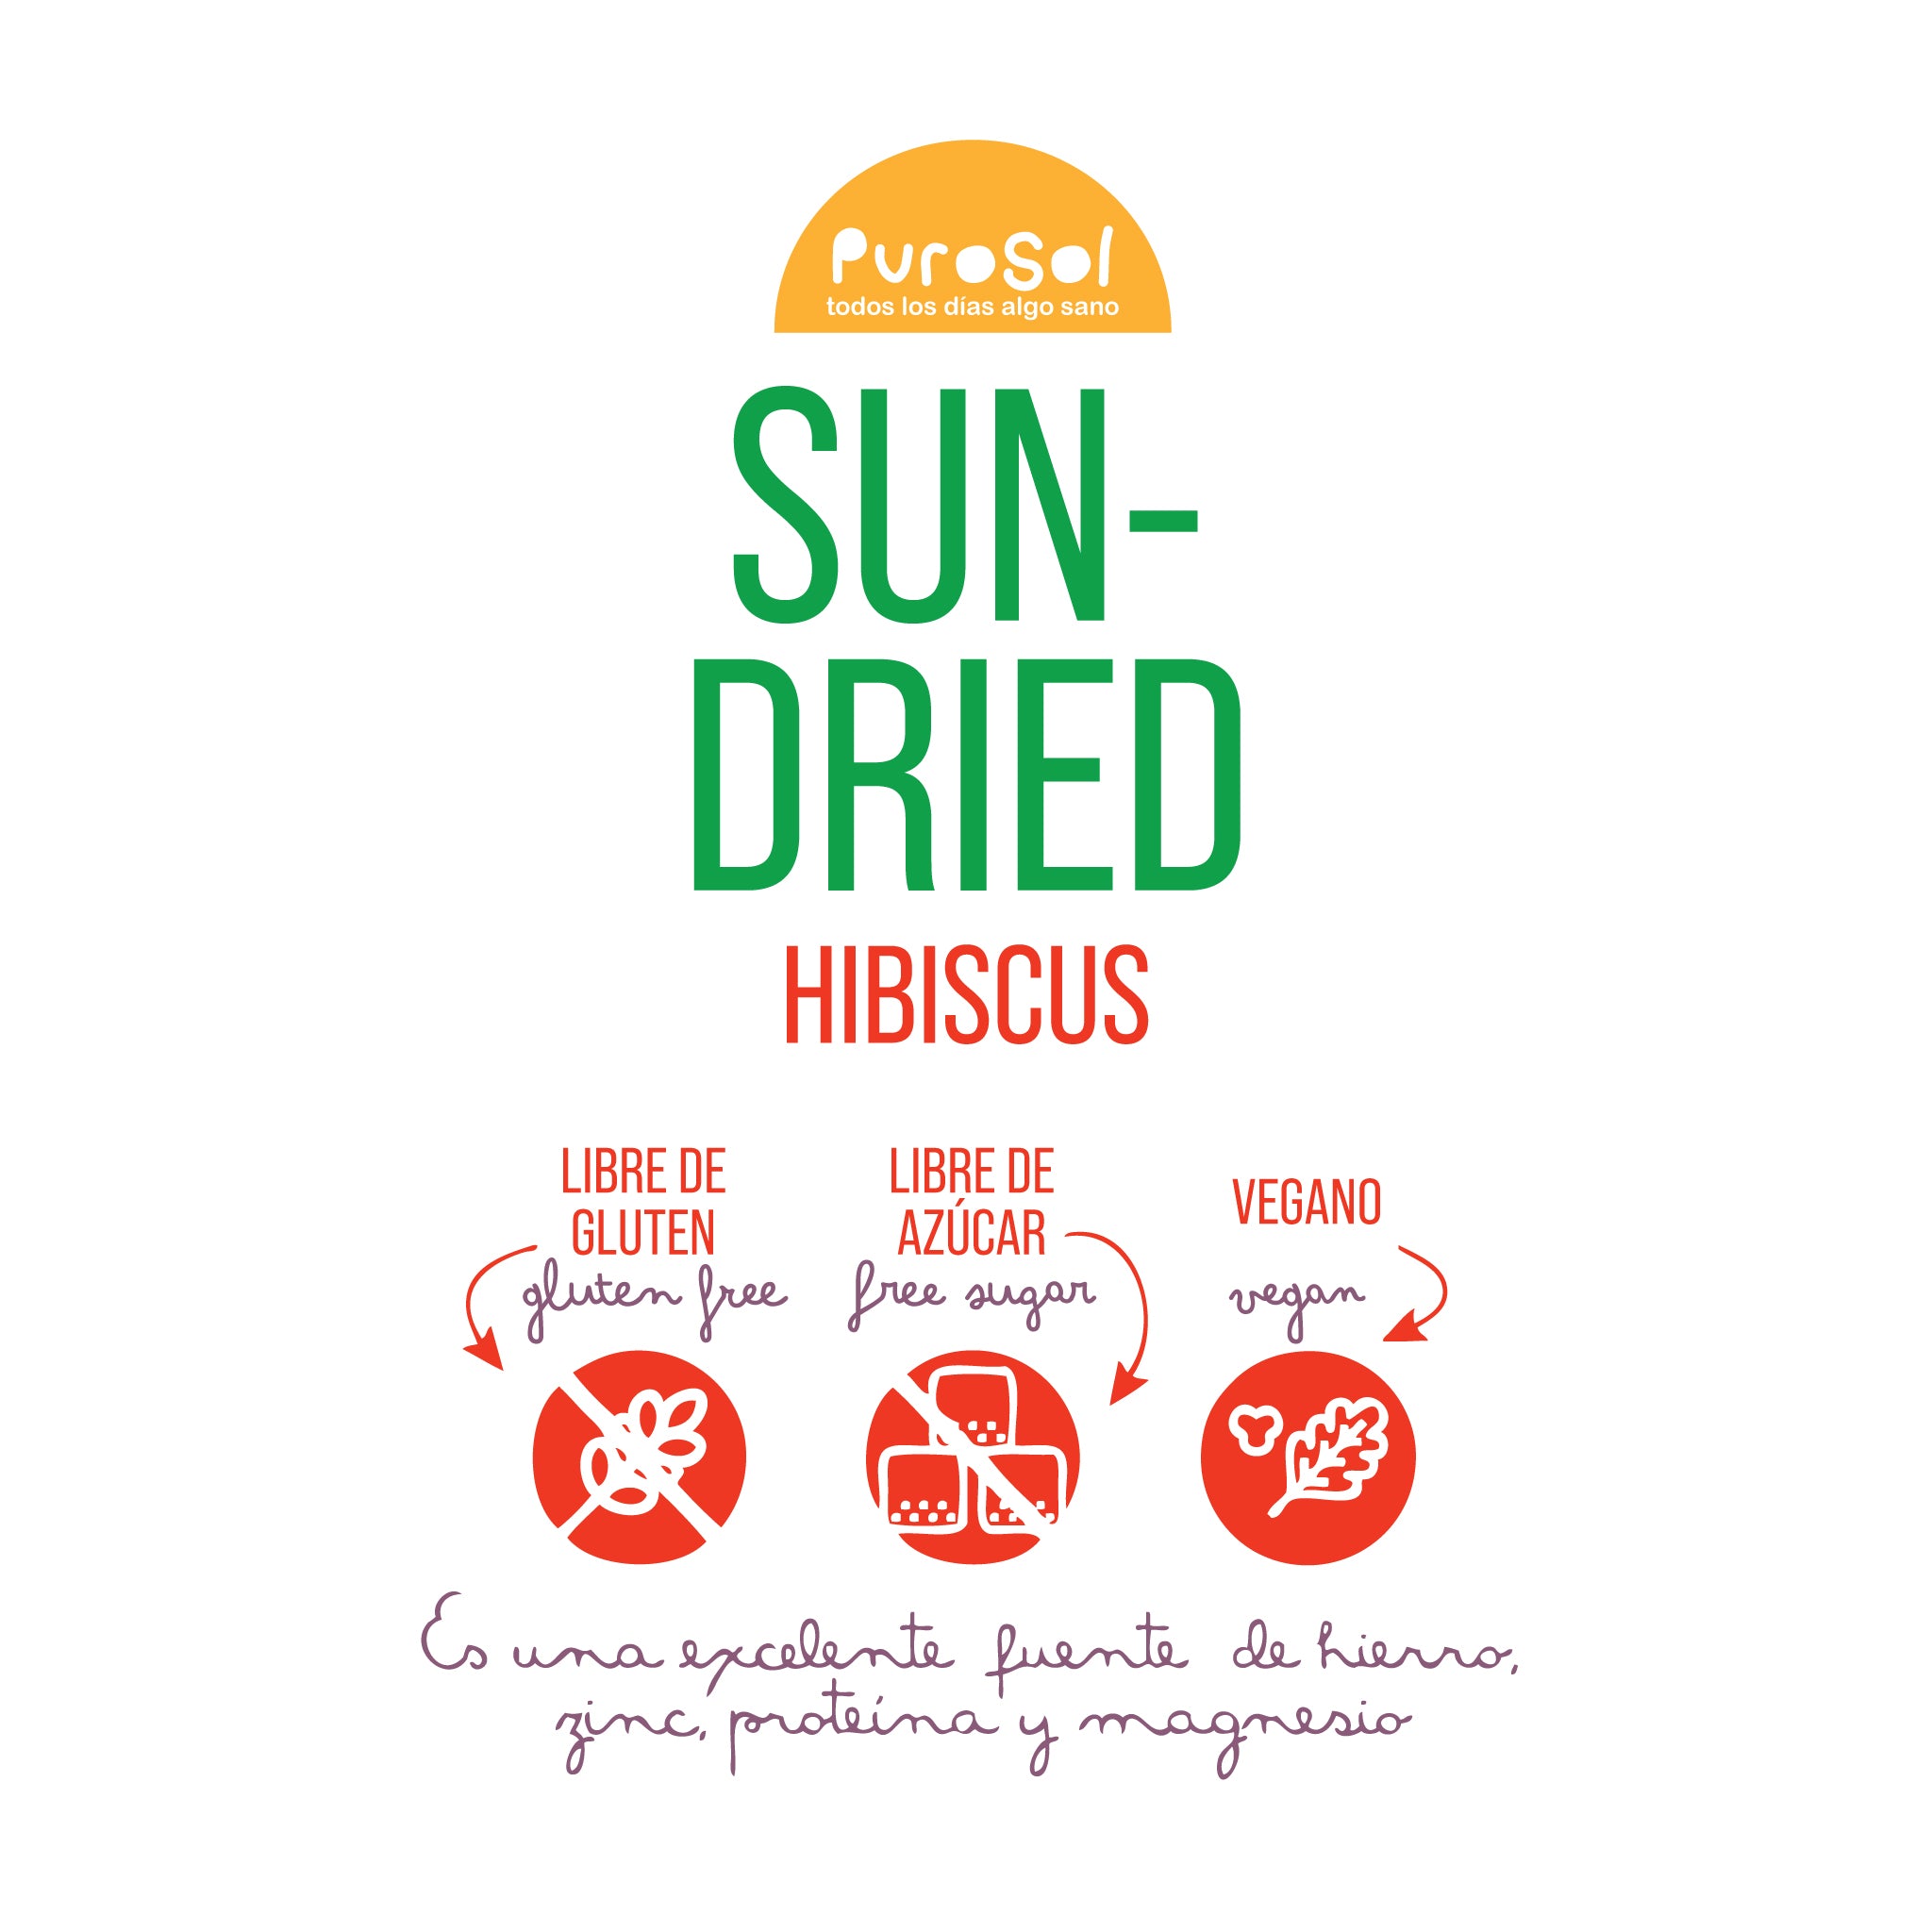 Sun Dried Hibiscus (217 gr.) by PuroSol-healthy snacks sun-dried in Guatemala, dehydrated fruits and herbs for all of your culinary creations